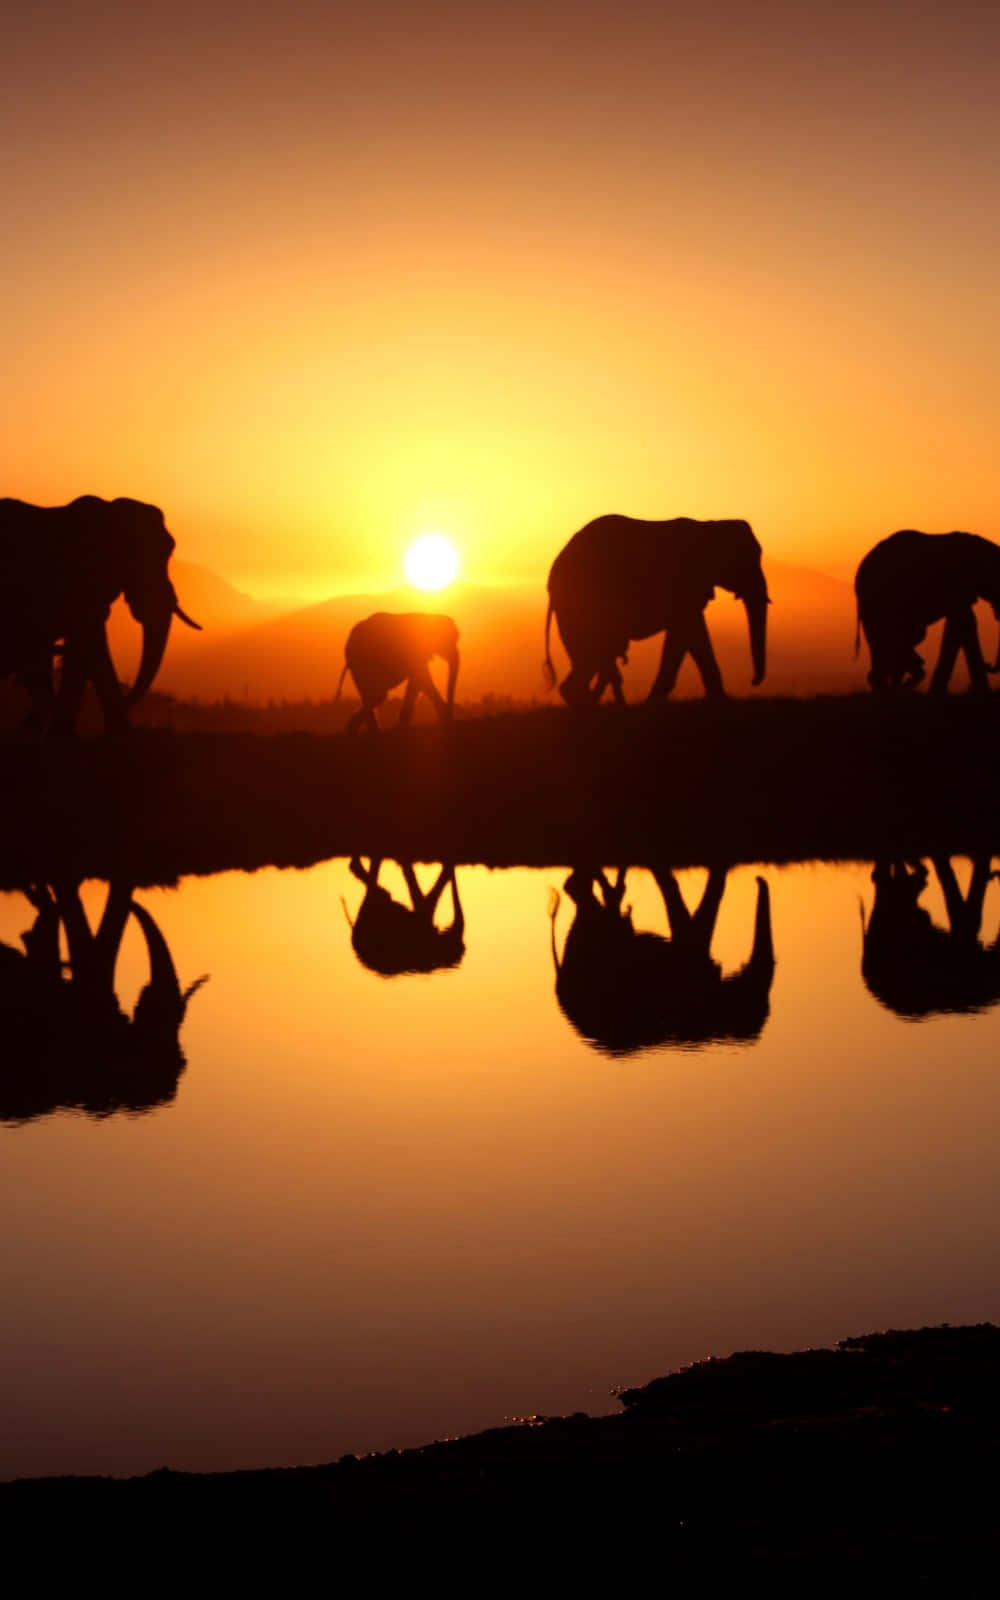 A Group Of Elephants Walking In The Water At Sunset